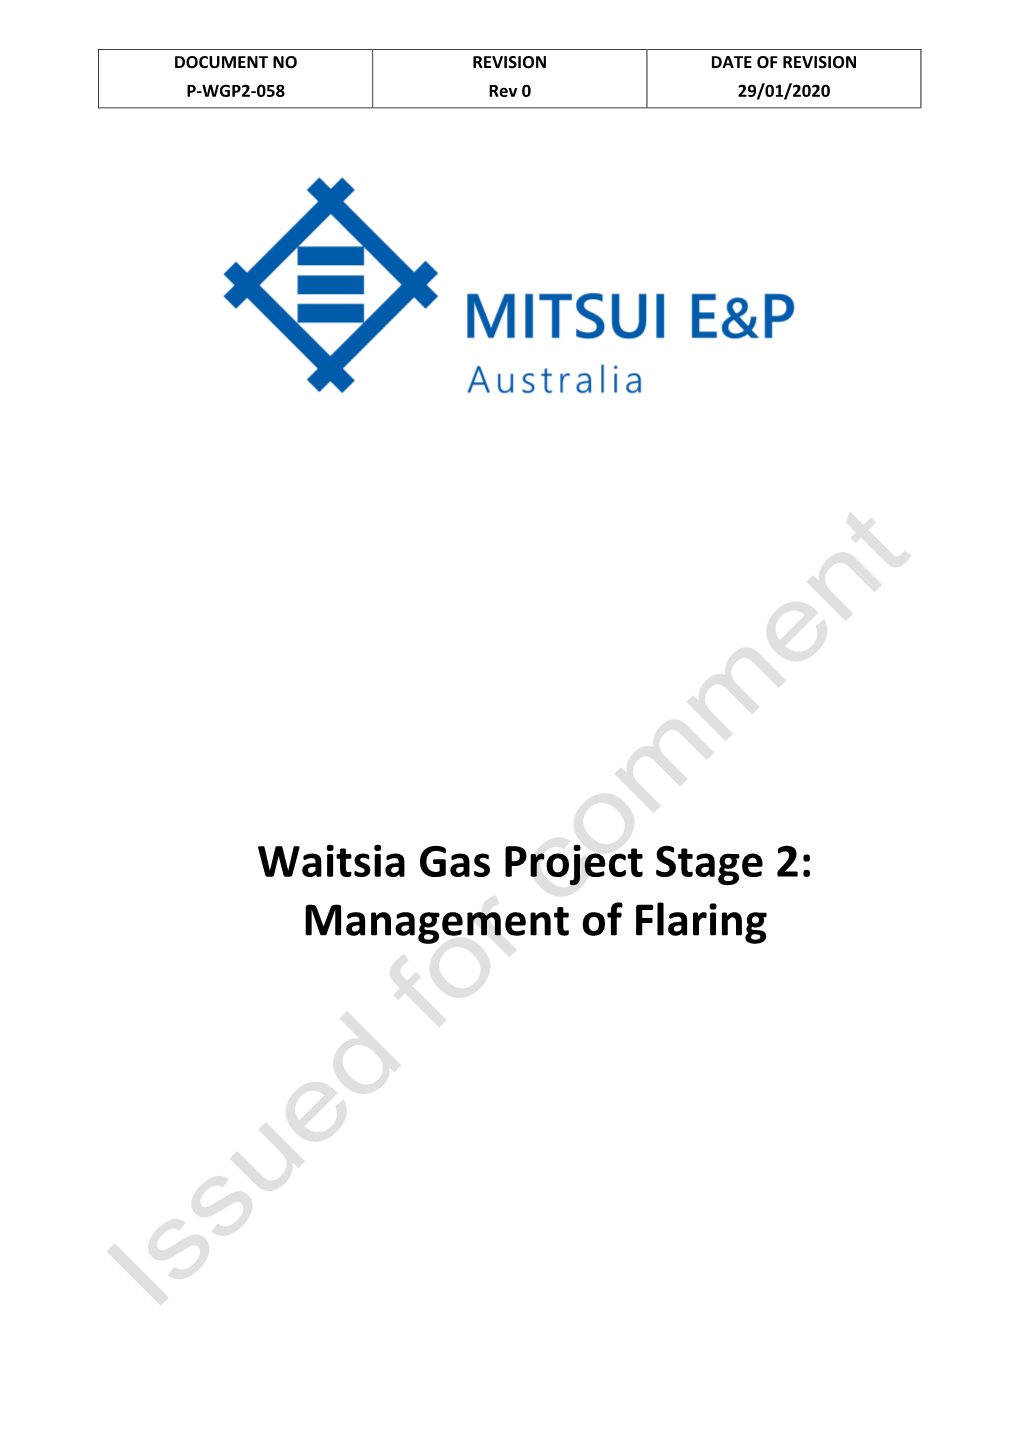 Waitsia Gas Project Stage 2: Management of Flaring